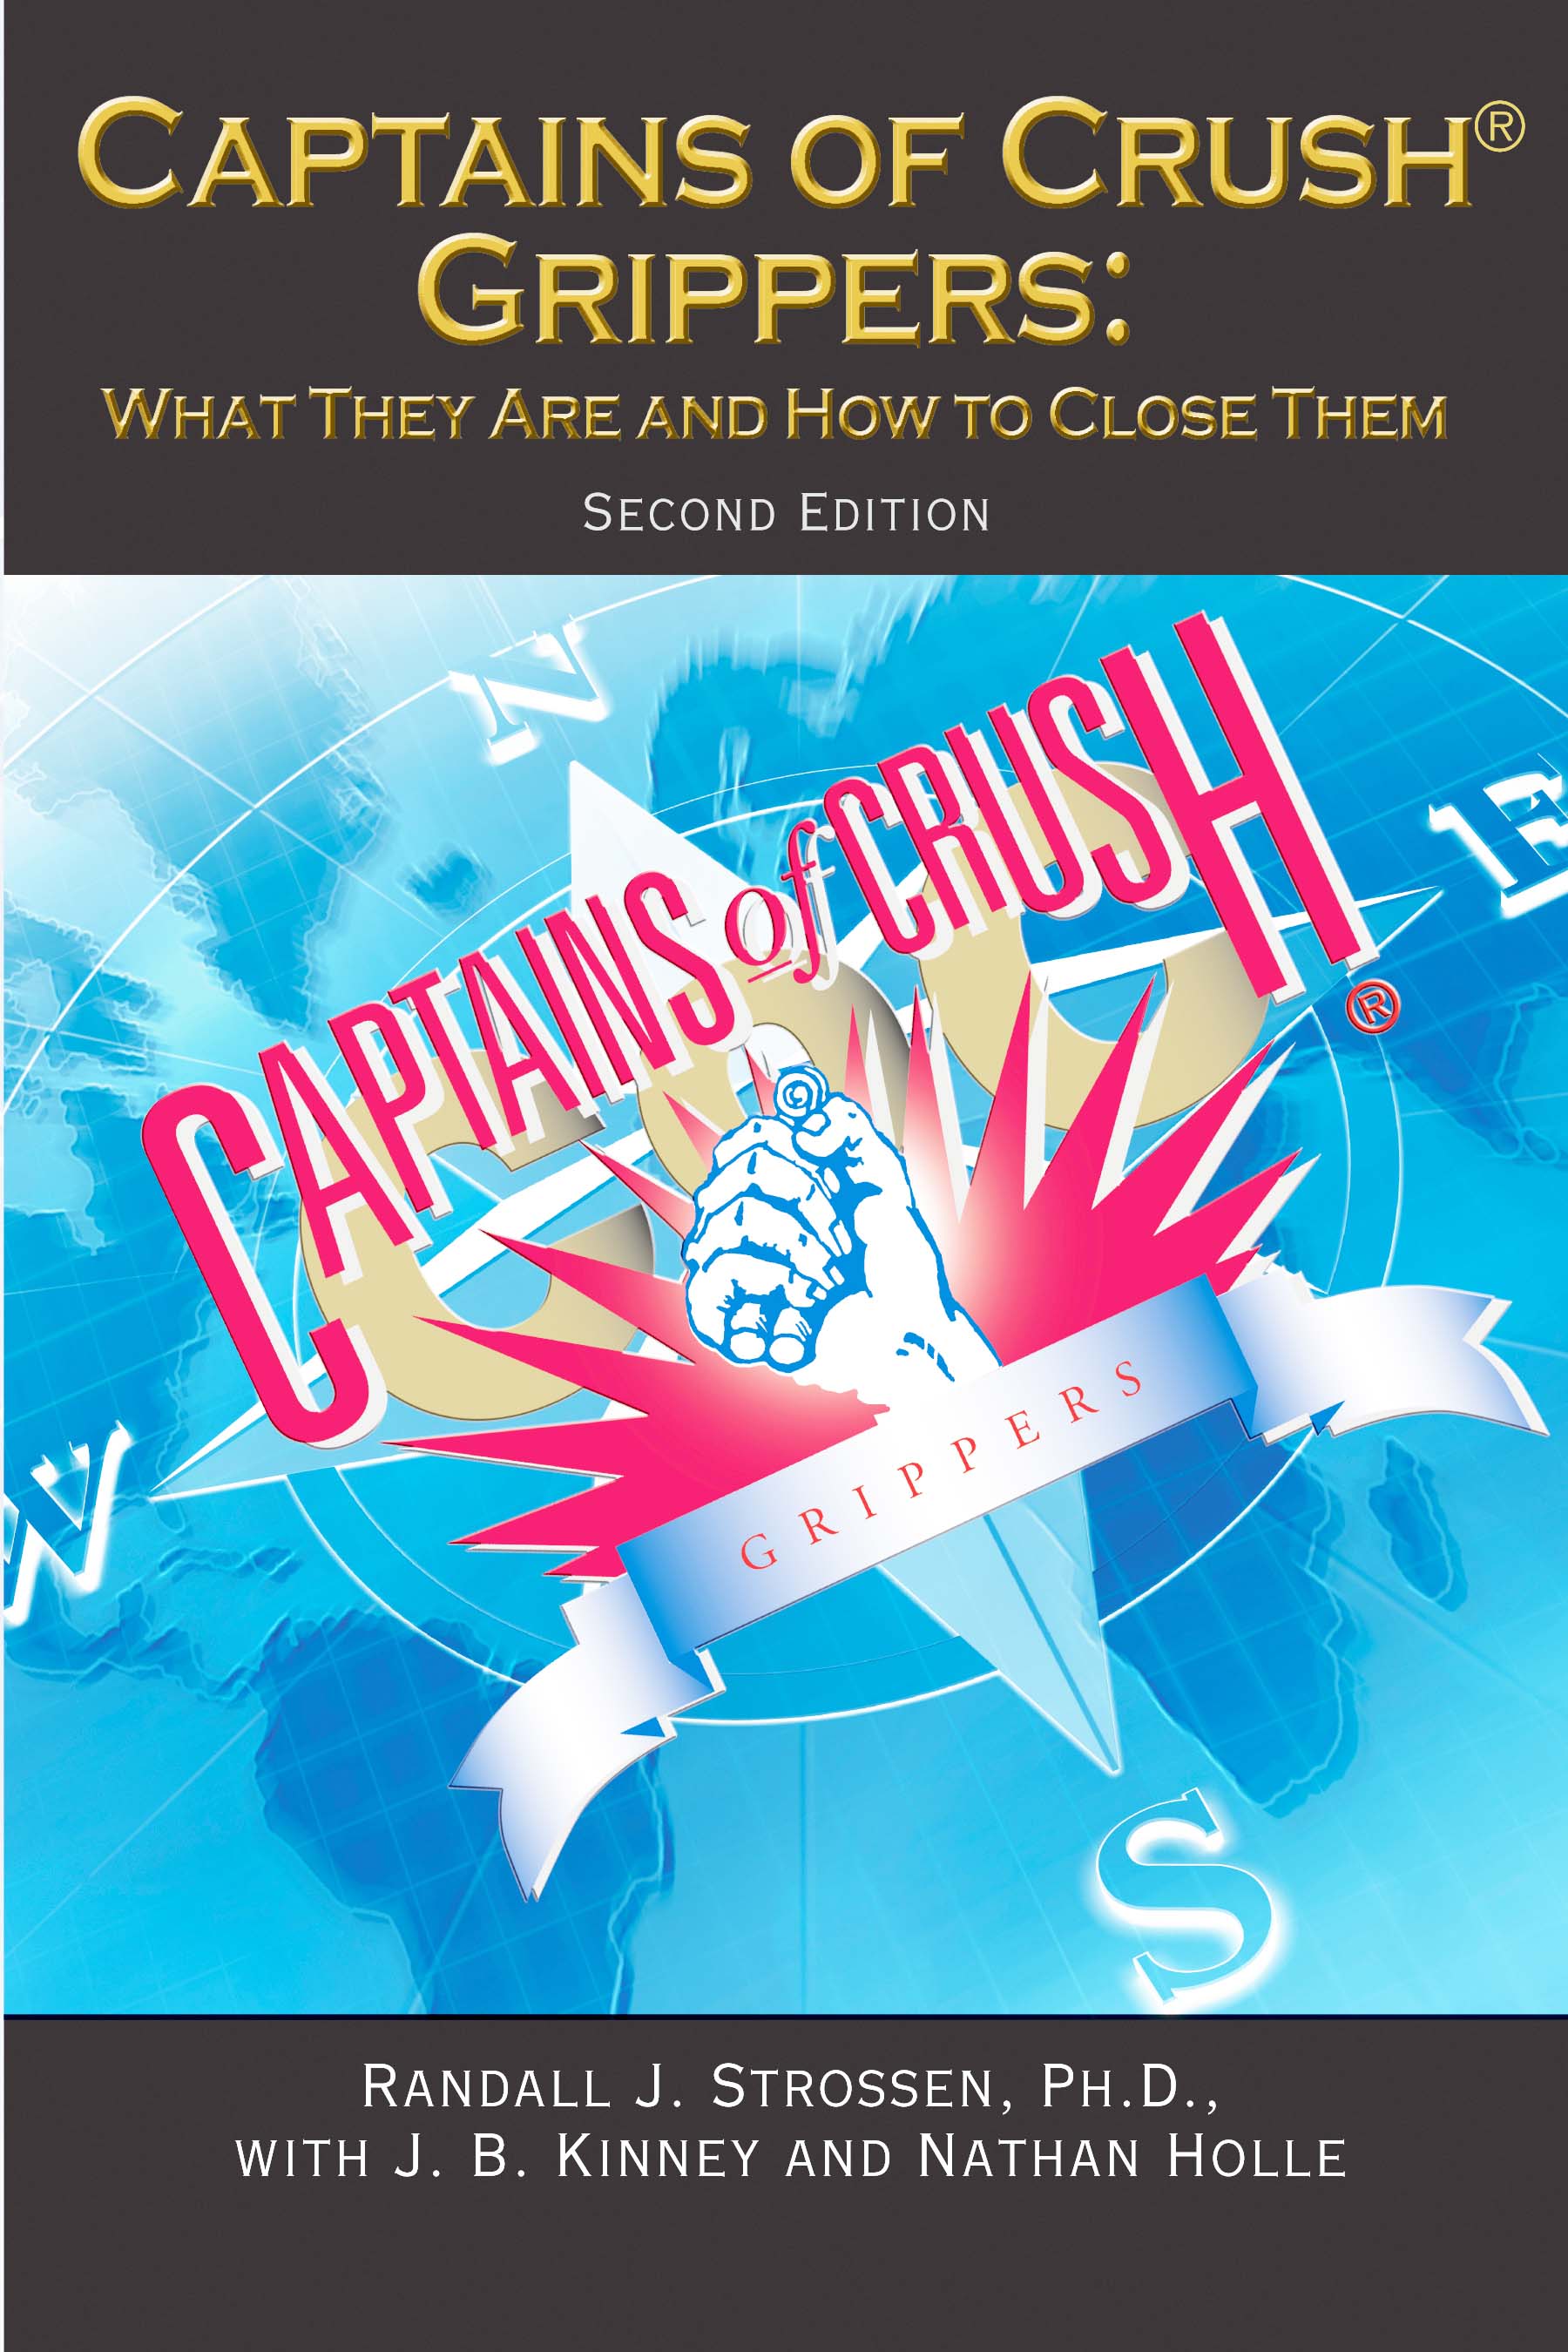 Captains of Crush Grippers:  What They Are and How to Close Them by Randall J. Strossen, Ph.D., with Joe Kinney and Nathan Holle